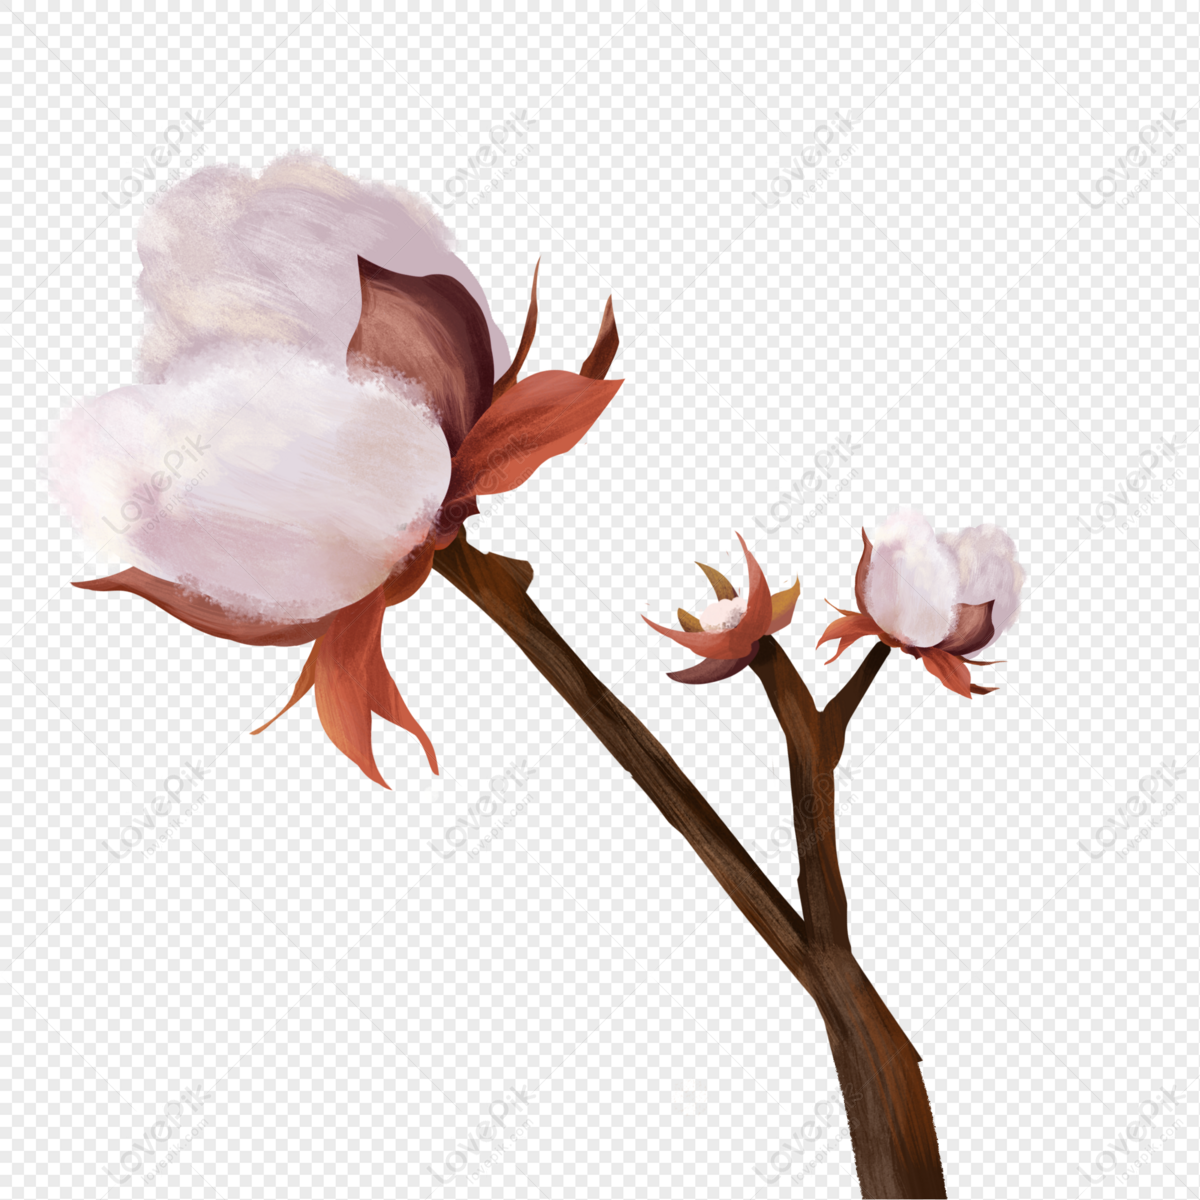 Mature Cotton, Crop, Cotton, Plant PNG Image And Clipart Image For Free ...